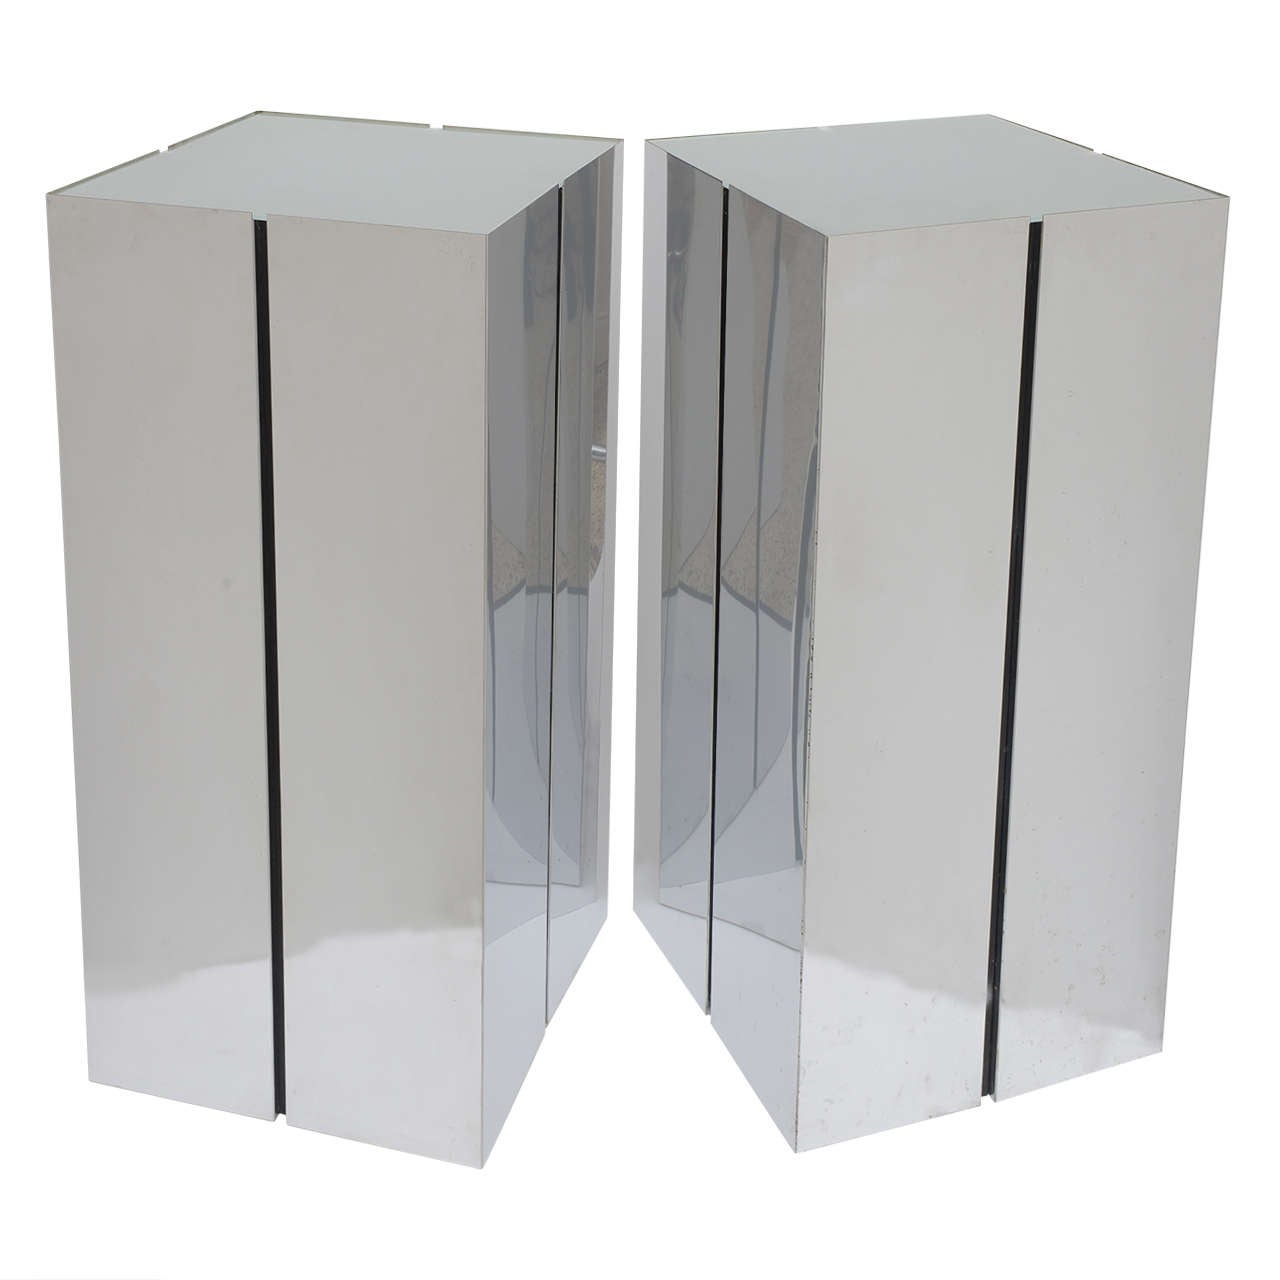 Pair of Lighted Pedestals by Neal Small for George Kovacs